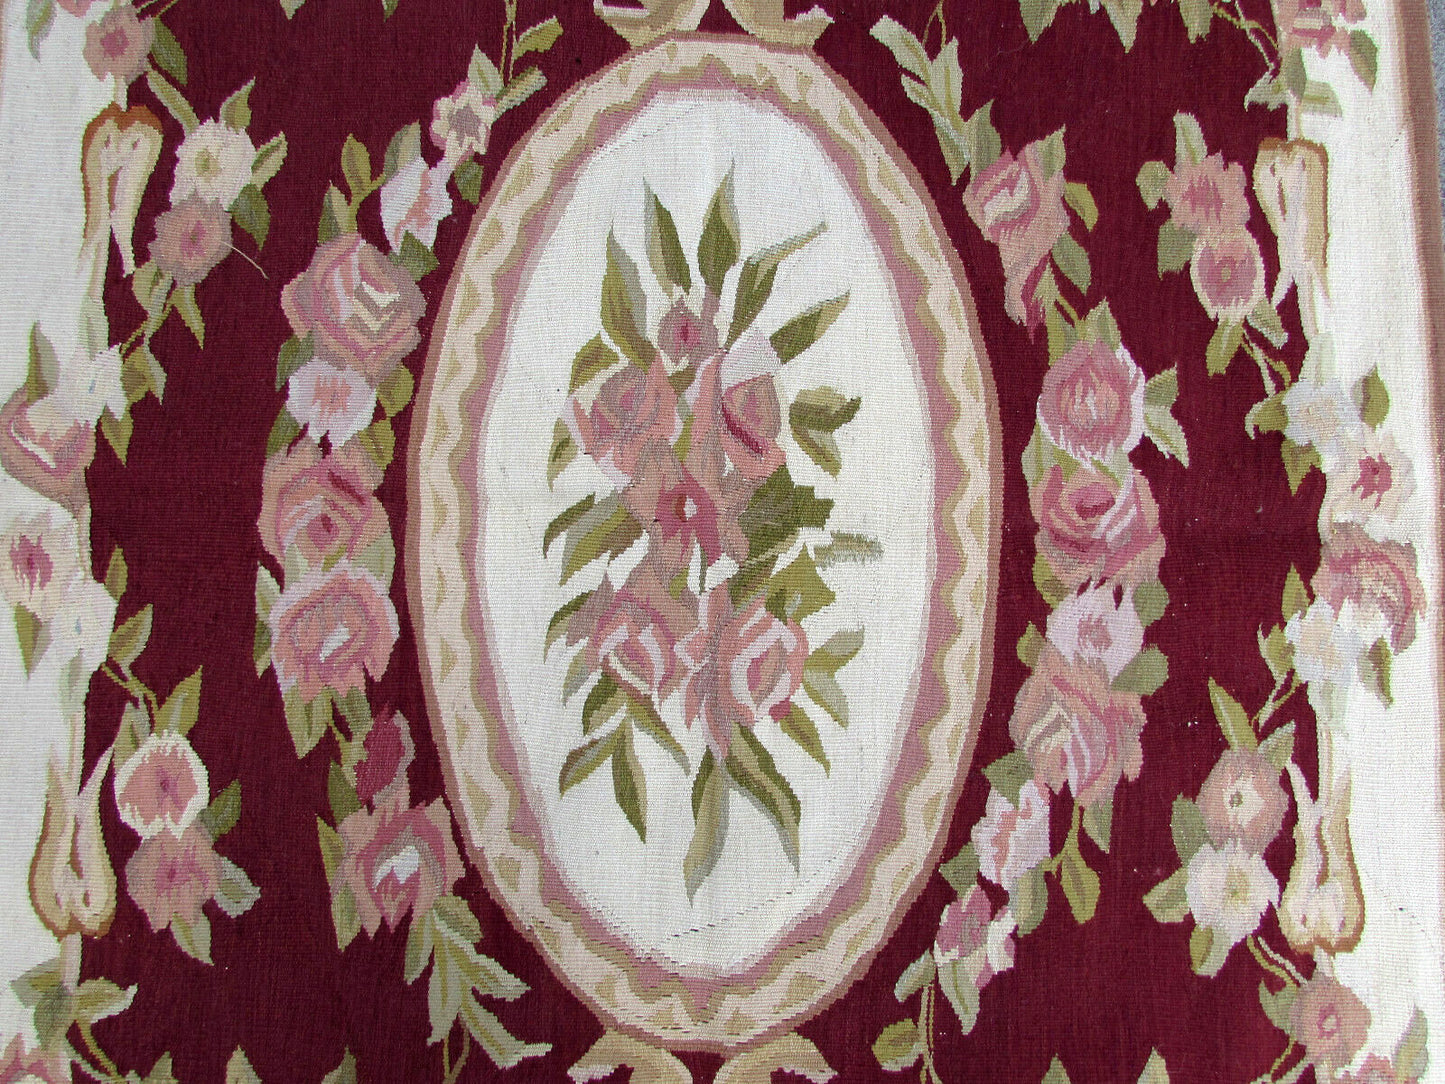 Detail of handmade wool rug from France with olive green and rose accents.